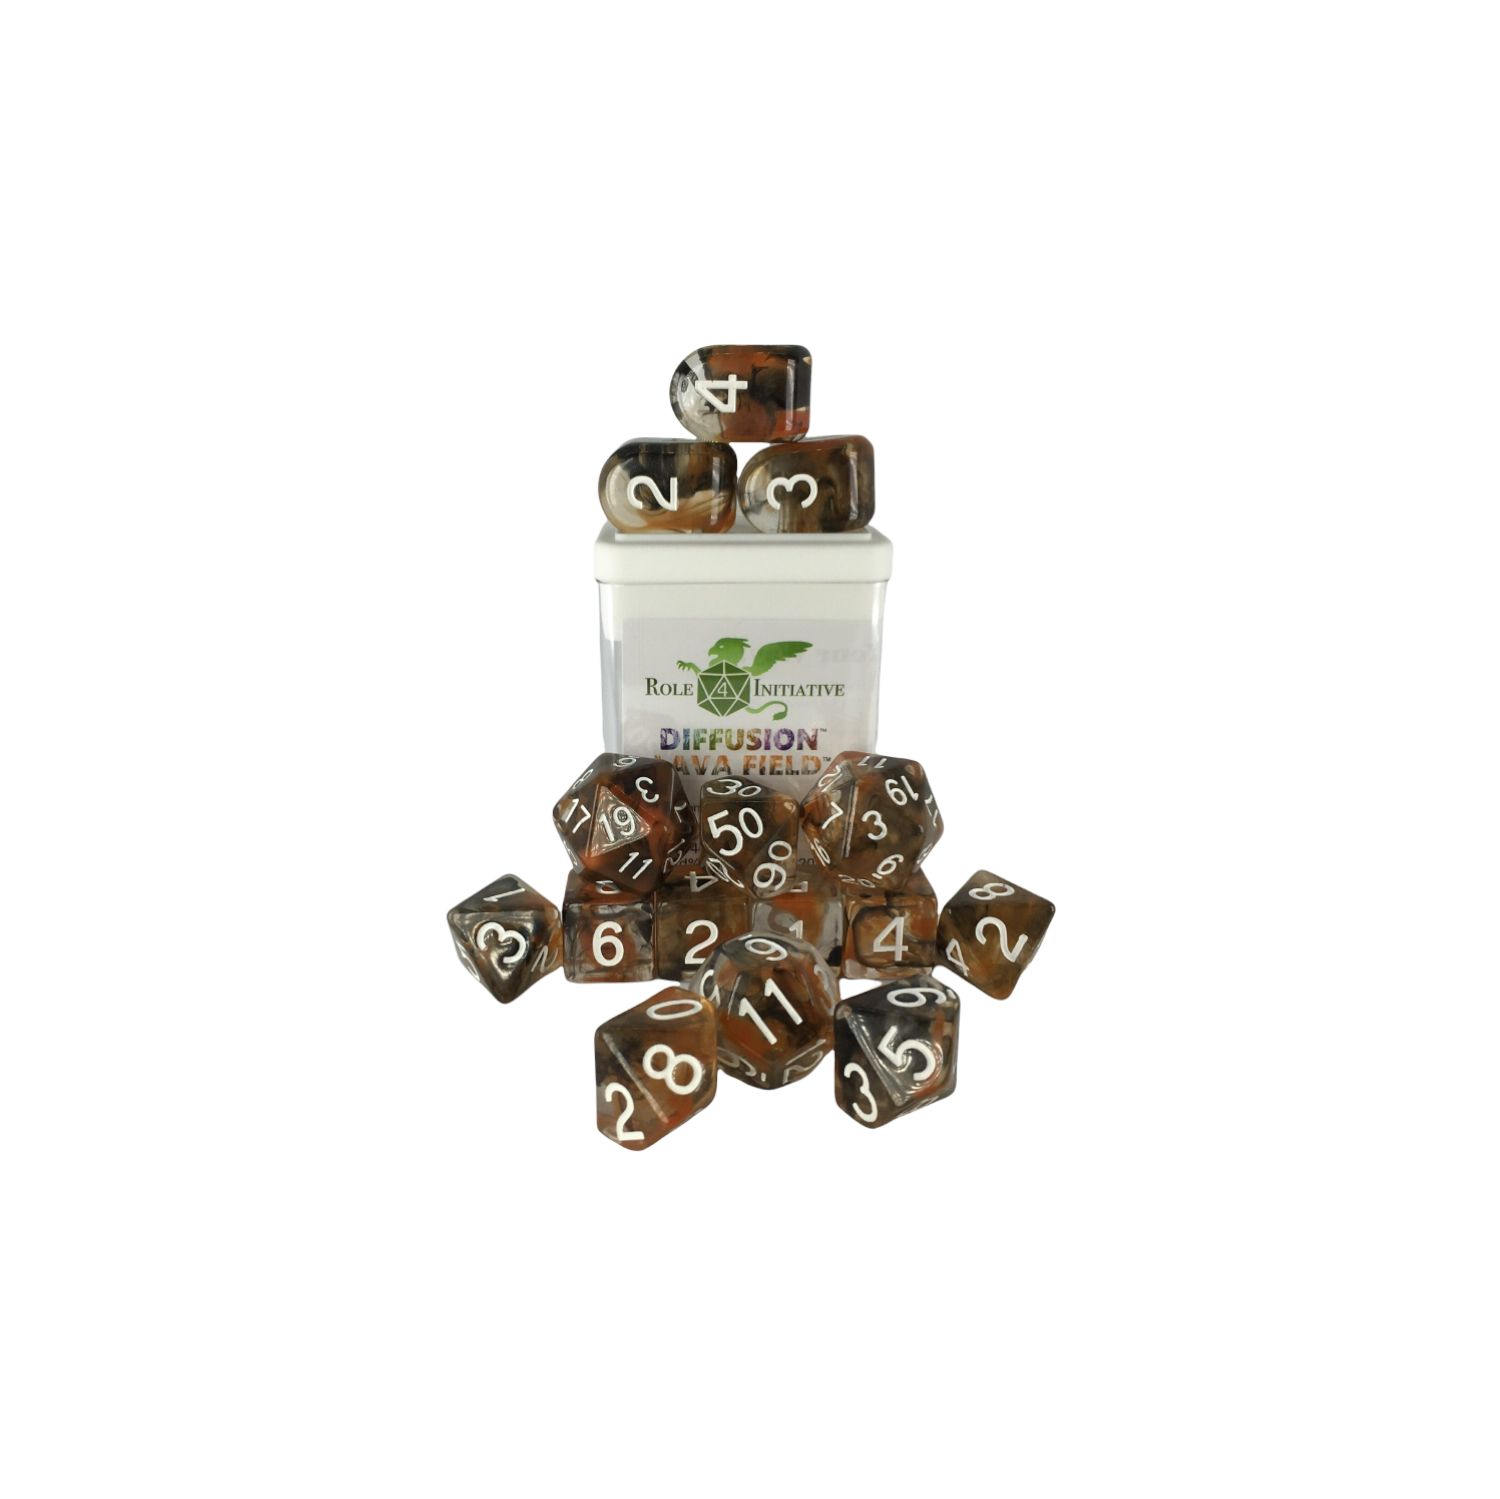 Set of 15 Dice: Diffusion Lava Field with Arch'd4